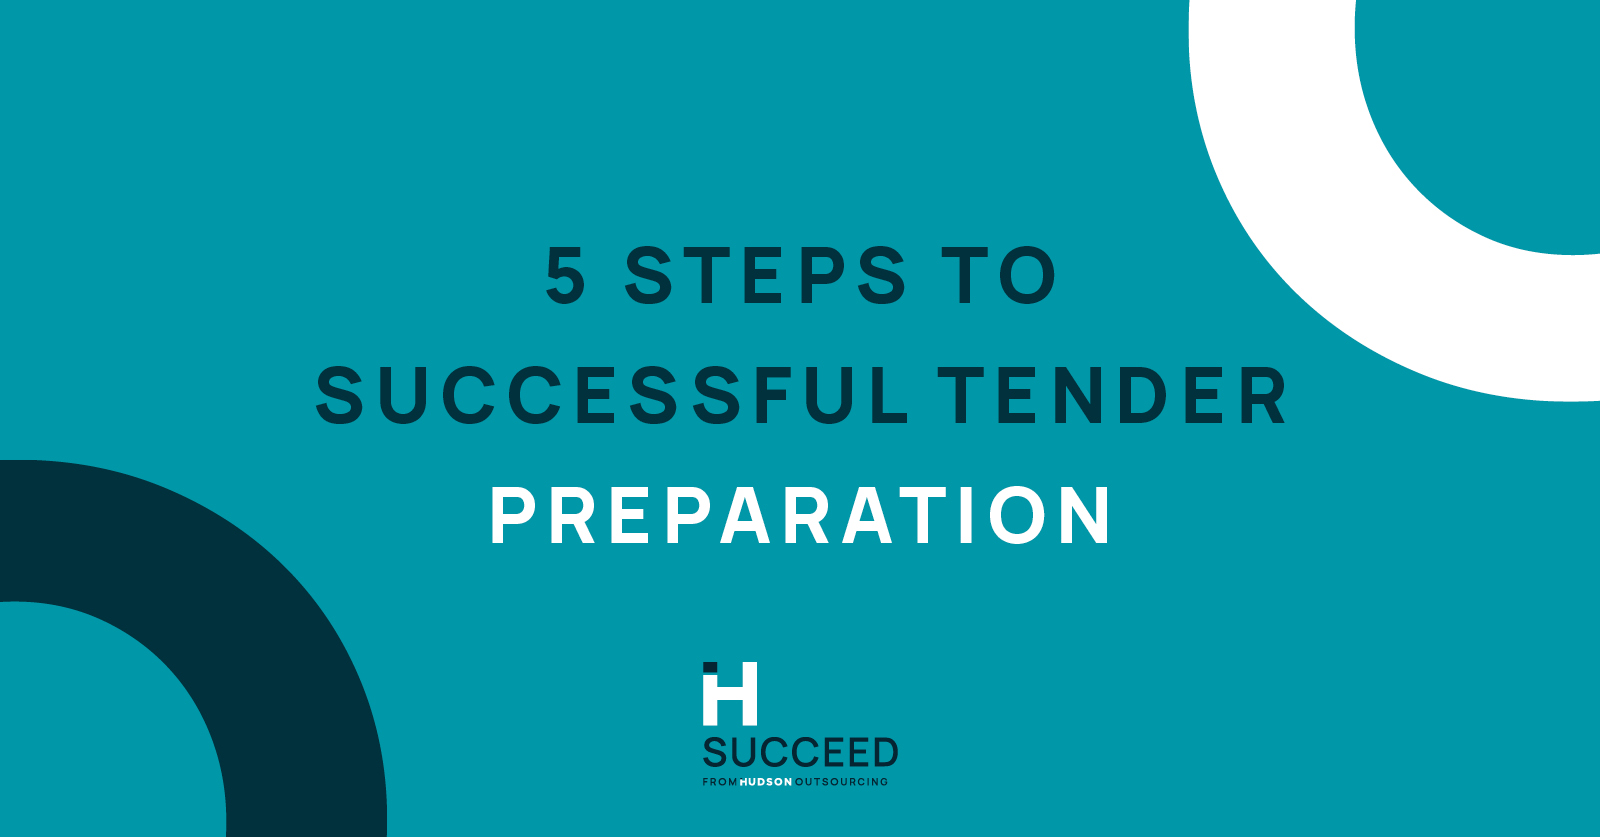 5 Ways To Get Through To Your Public Tenders